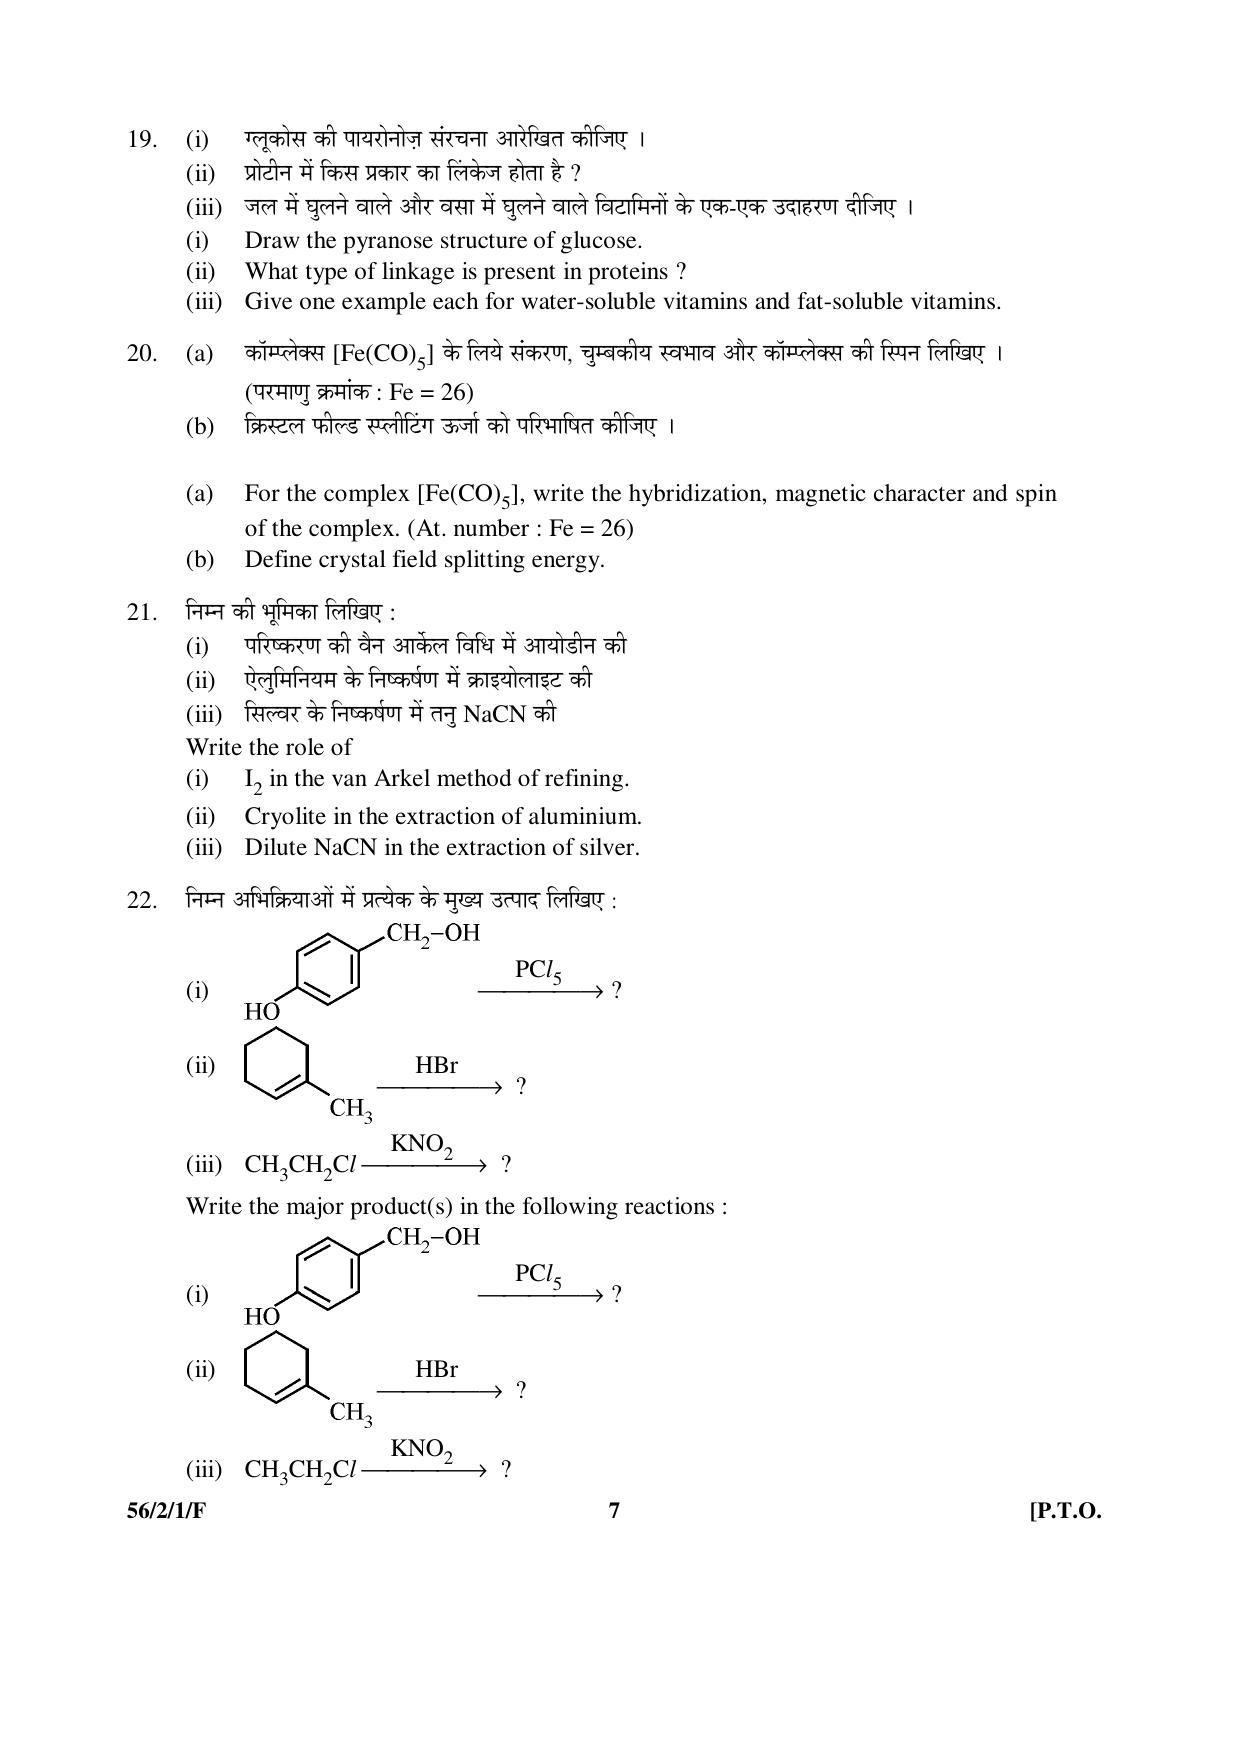 CBSE Class 12 56-2-1-F _Chemistry_ 2016 Question Paper - Page 7